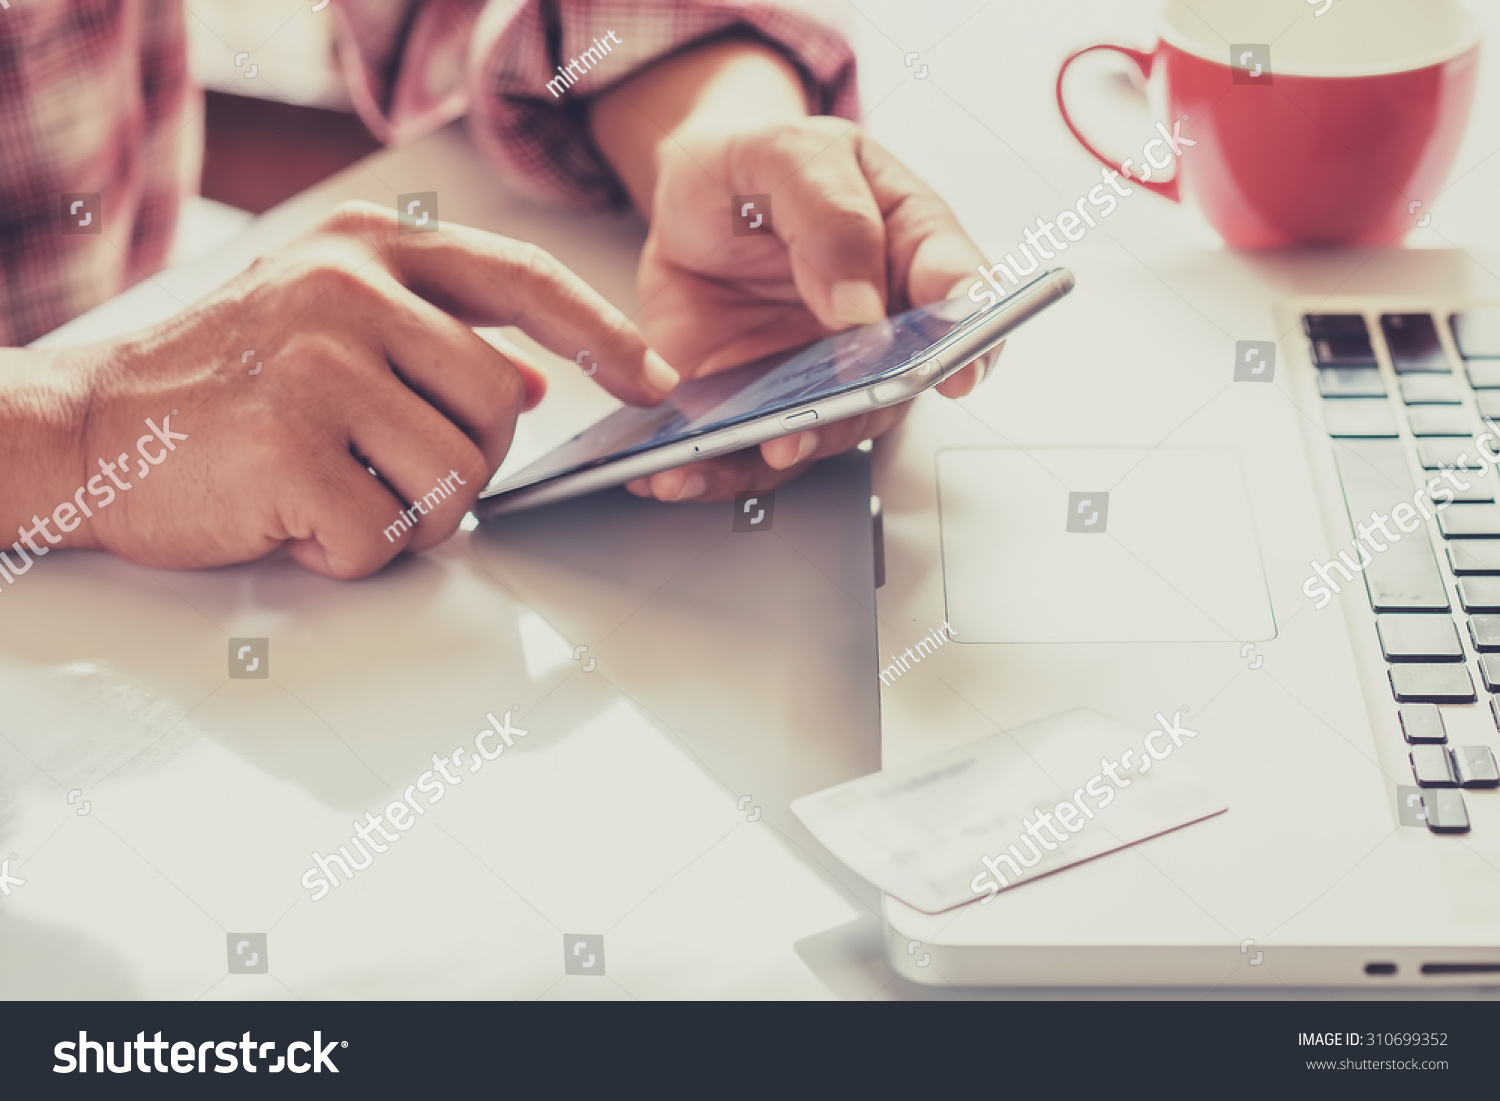 Man's hands holding a credit card and using smart phone for online shopping #310699352